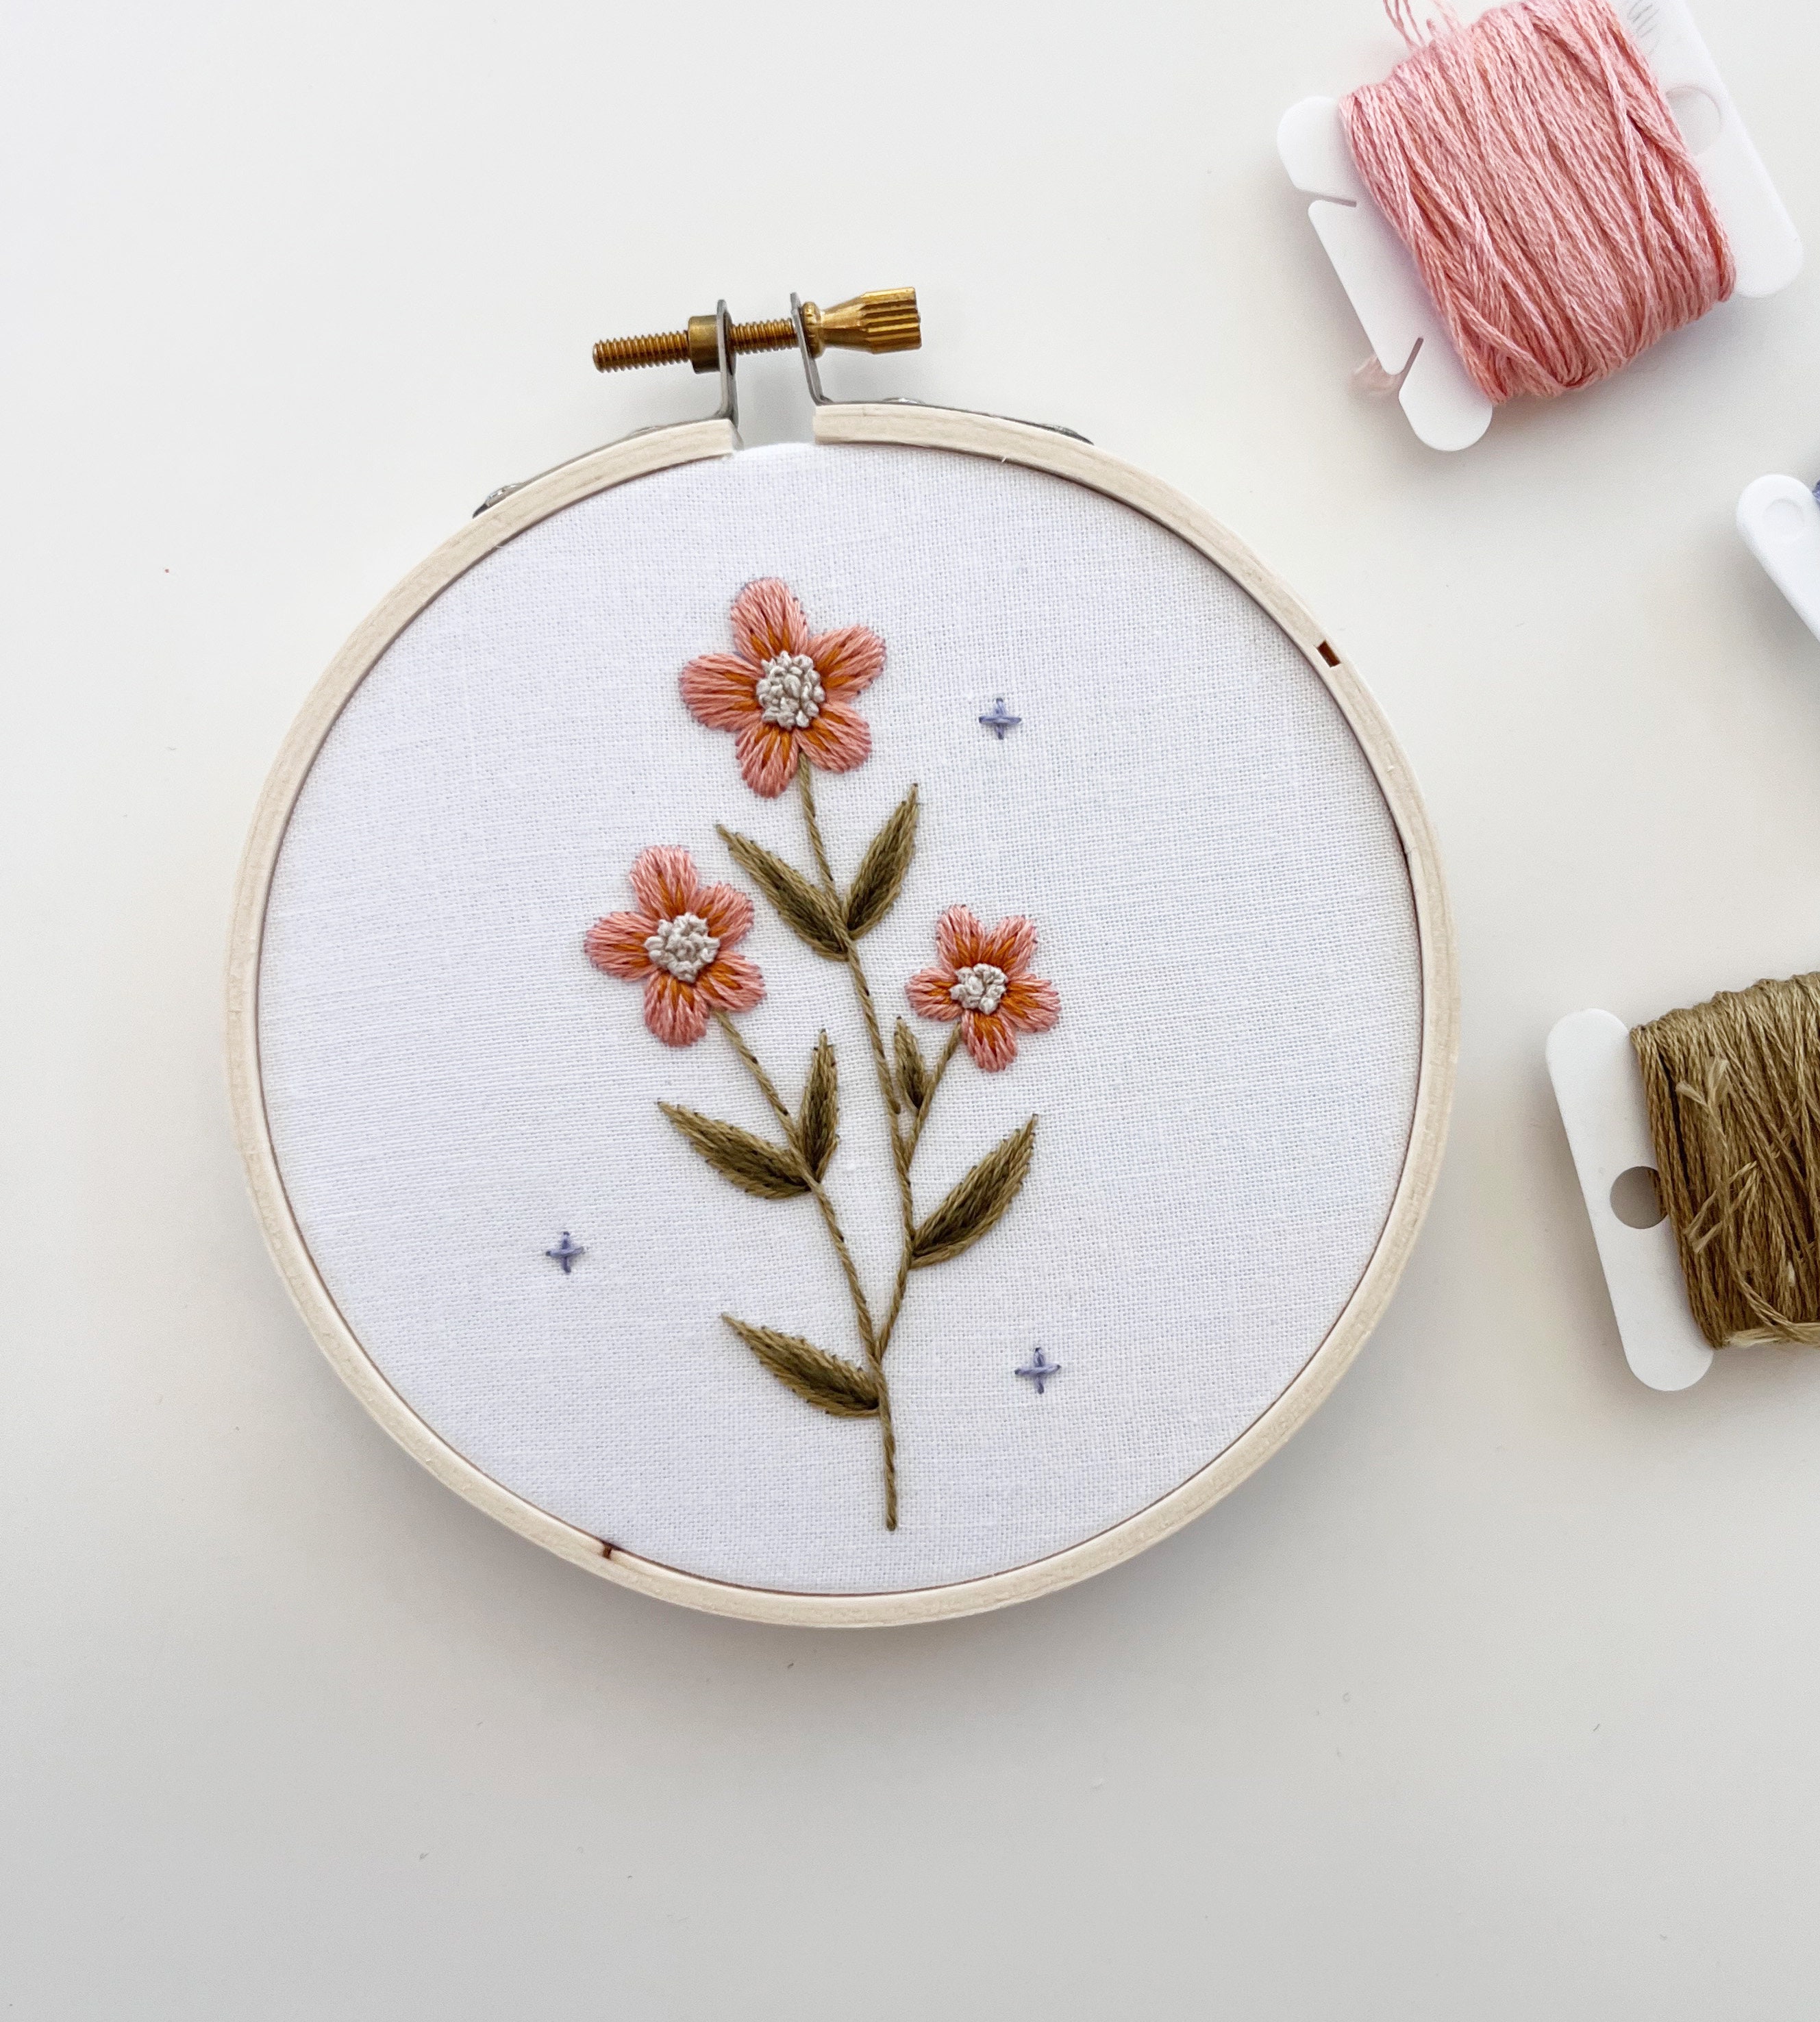 DIY Embroidery Kit for Beginners, Floral Embroidery Pattern, Wood  Embroidery, DIY Wooden Crafts, Adult Craft Kit Women, Wooden Embroidery 